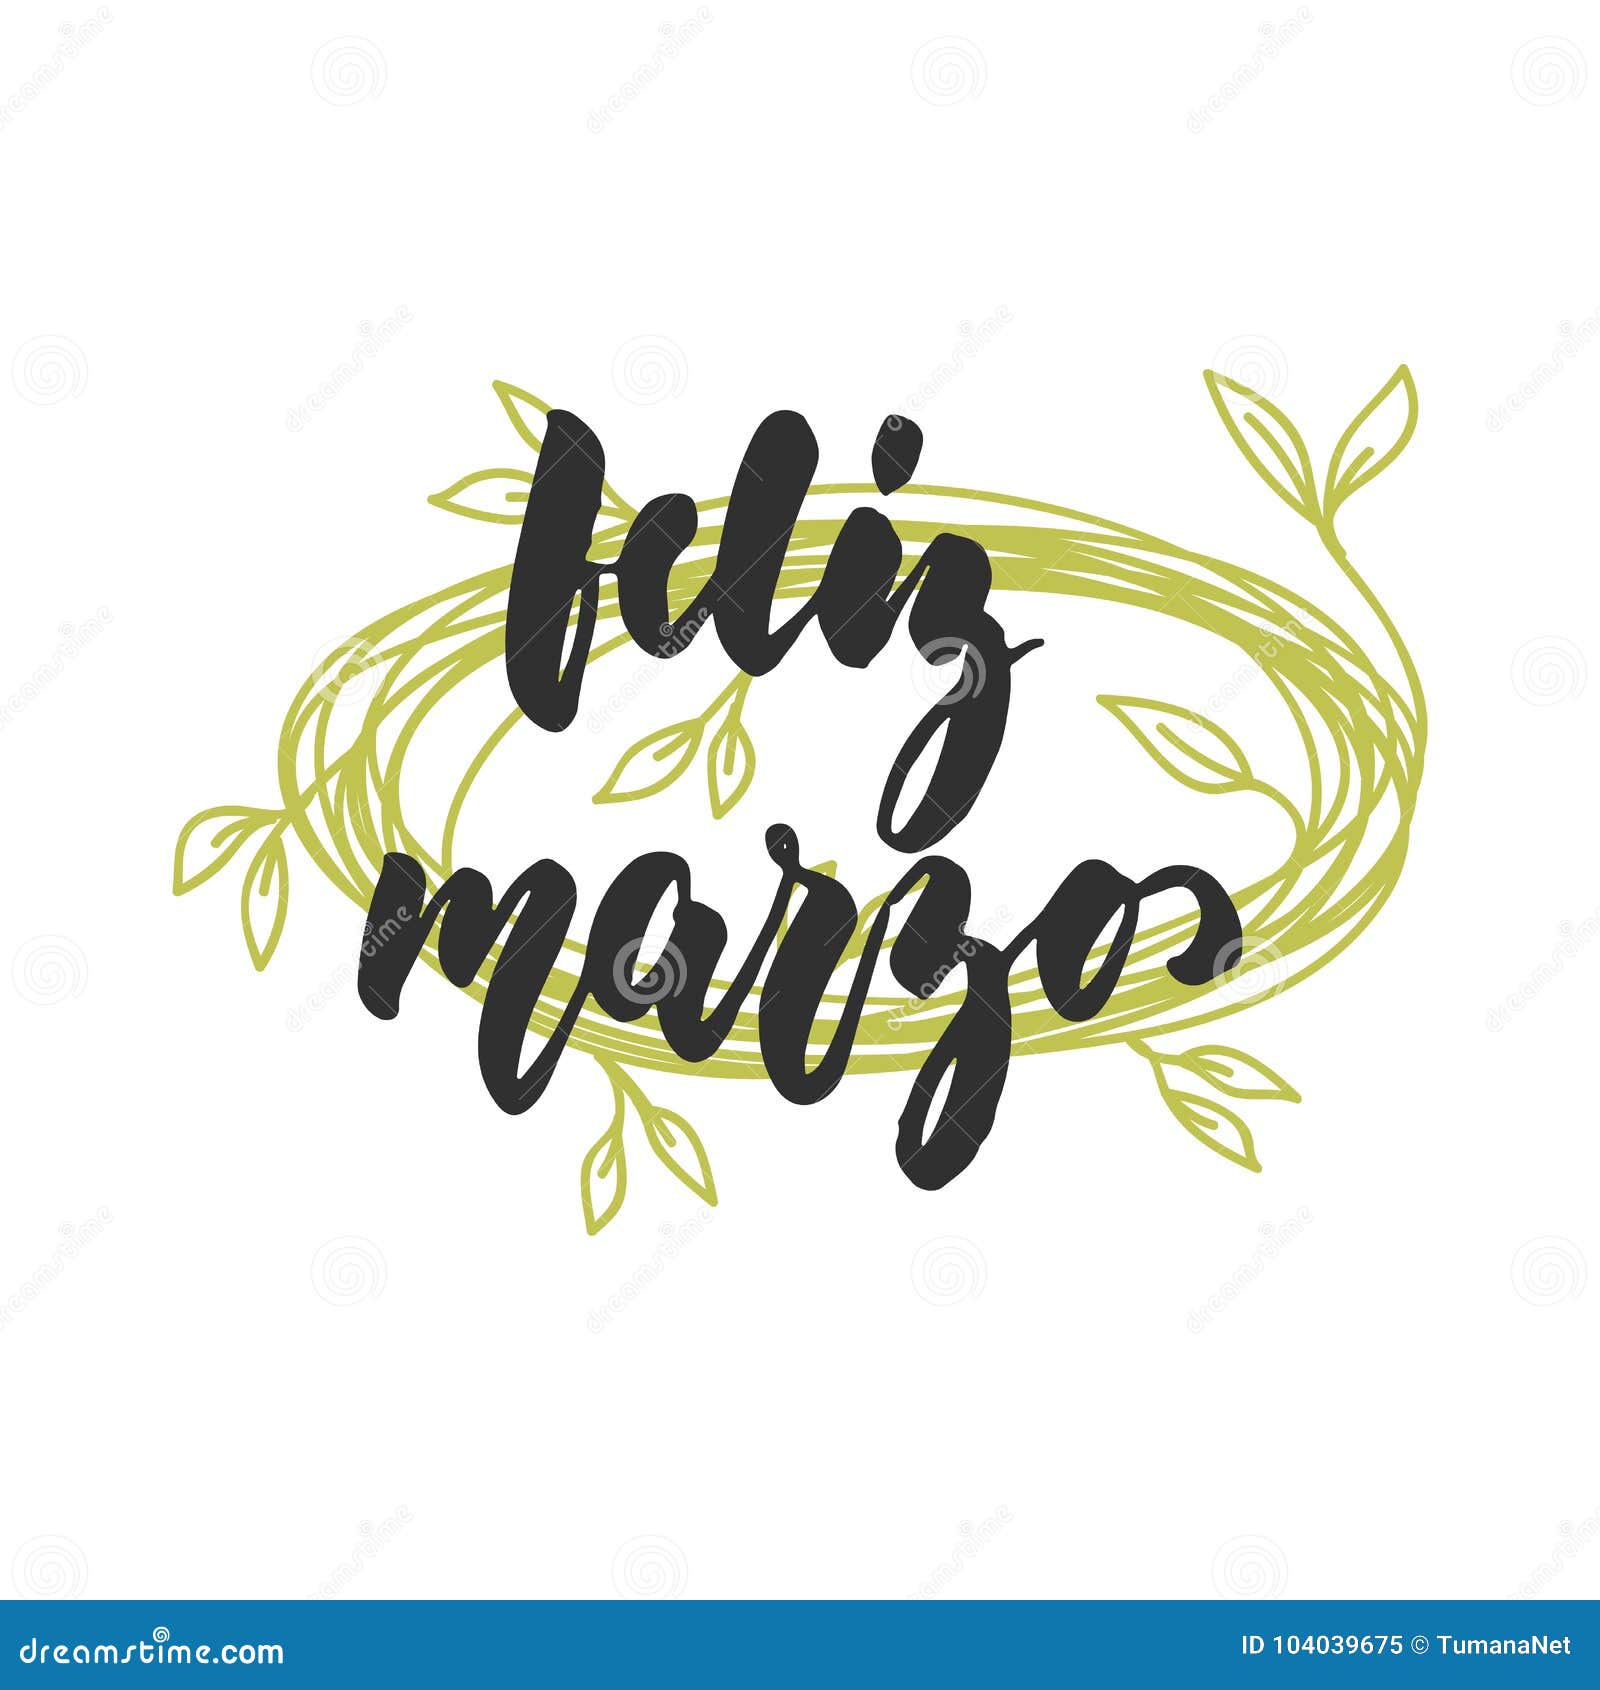 feliz marzo - happy march in spanish, hand drawn latin spring month lettering quote